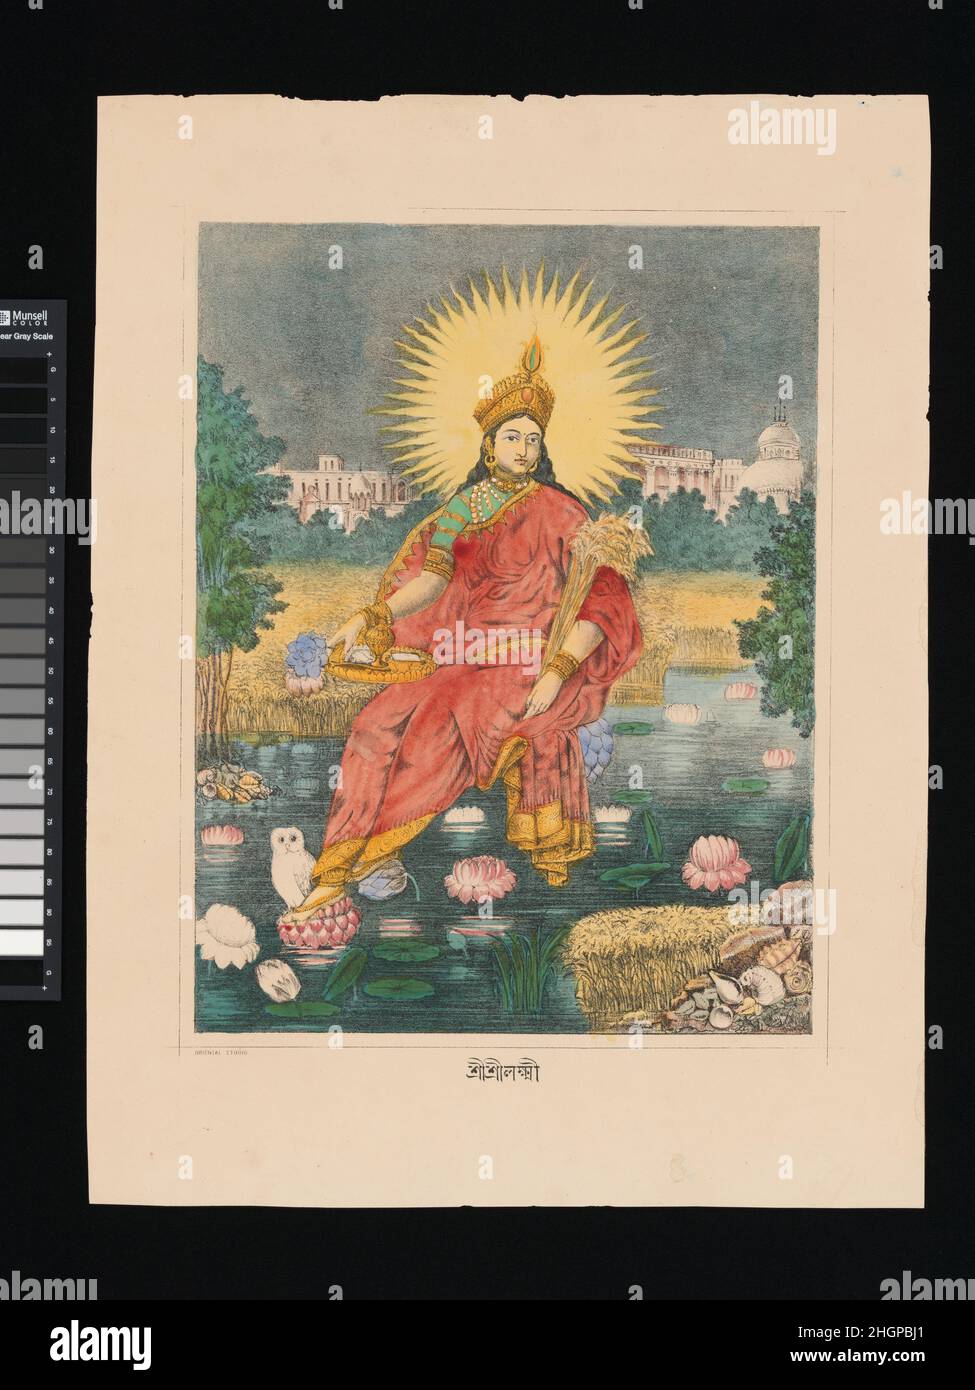 Shri Shri Lakshmi ca. 1880 India Lakshmi enthroned on lotus, with a radiate solar halo, cornucopia-like bundle of wheat and toga-like sari attesting to the strong connection between this print and European depictions of Greek gods. The buildings in the background juxtapose traditional Bengali temple architecture with the neo-classical European architecture of colonial Calcutta, further amplifying the casting of a traditional deity in neo-classical guise.. Shri Shri Lakshmi. India. ca. 1880. Lithograph with hand-coloring. Prints Stock Photo